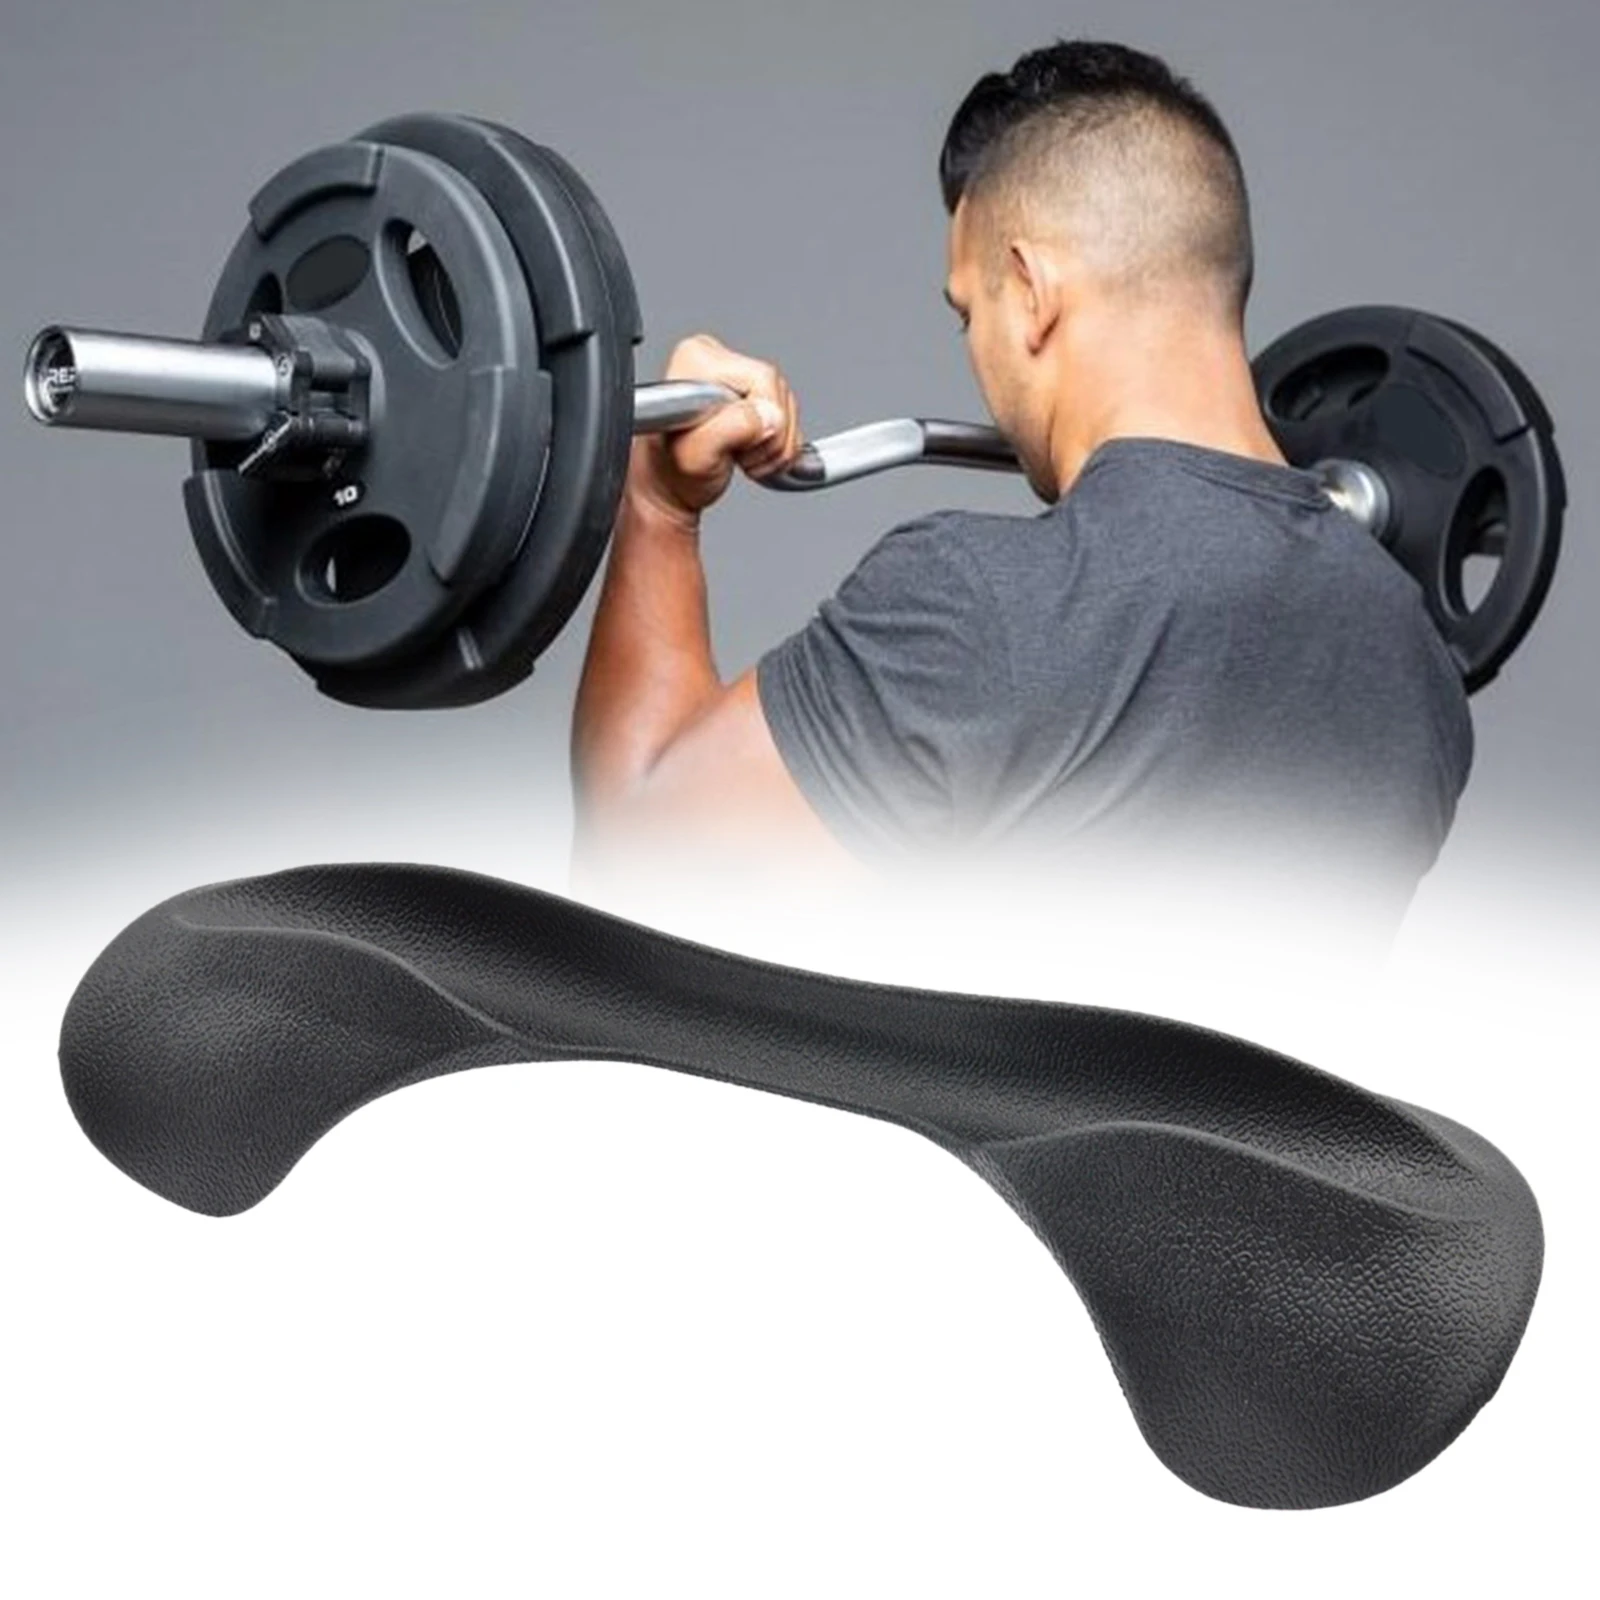 Weight Lifting Squat Neck Shoulder Pad Barbell Training Stabilizer Support Pads Gym Fitness Gear Equipments Disperse Pressure